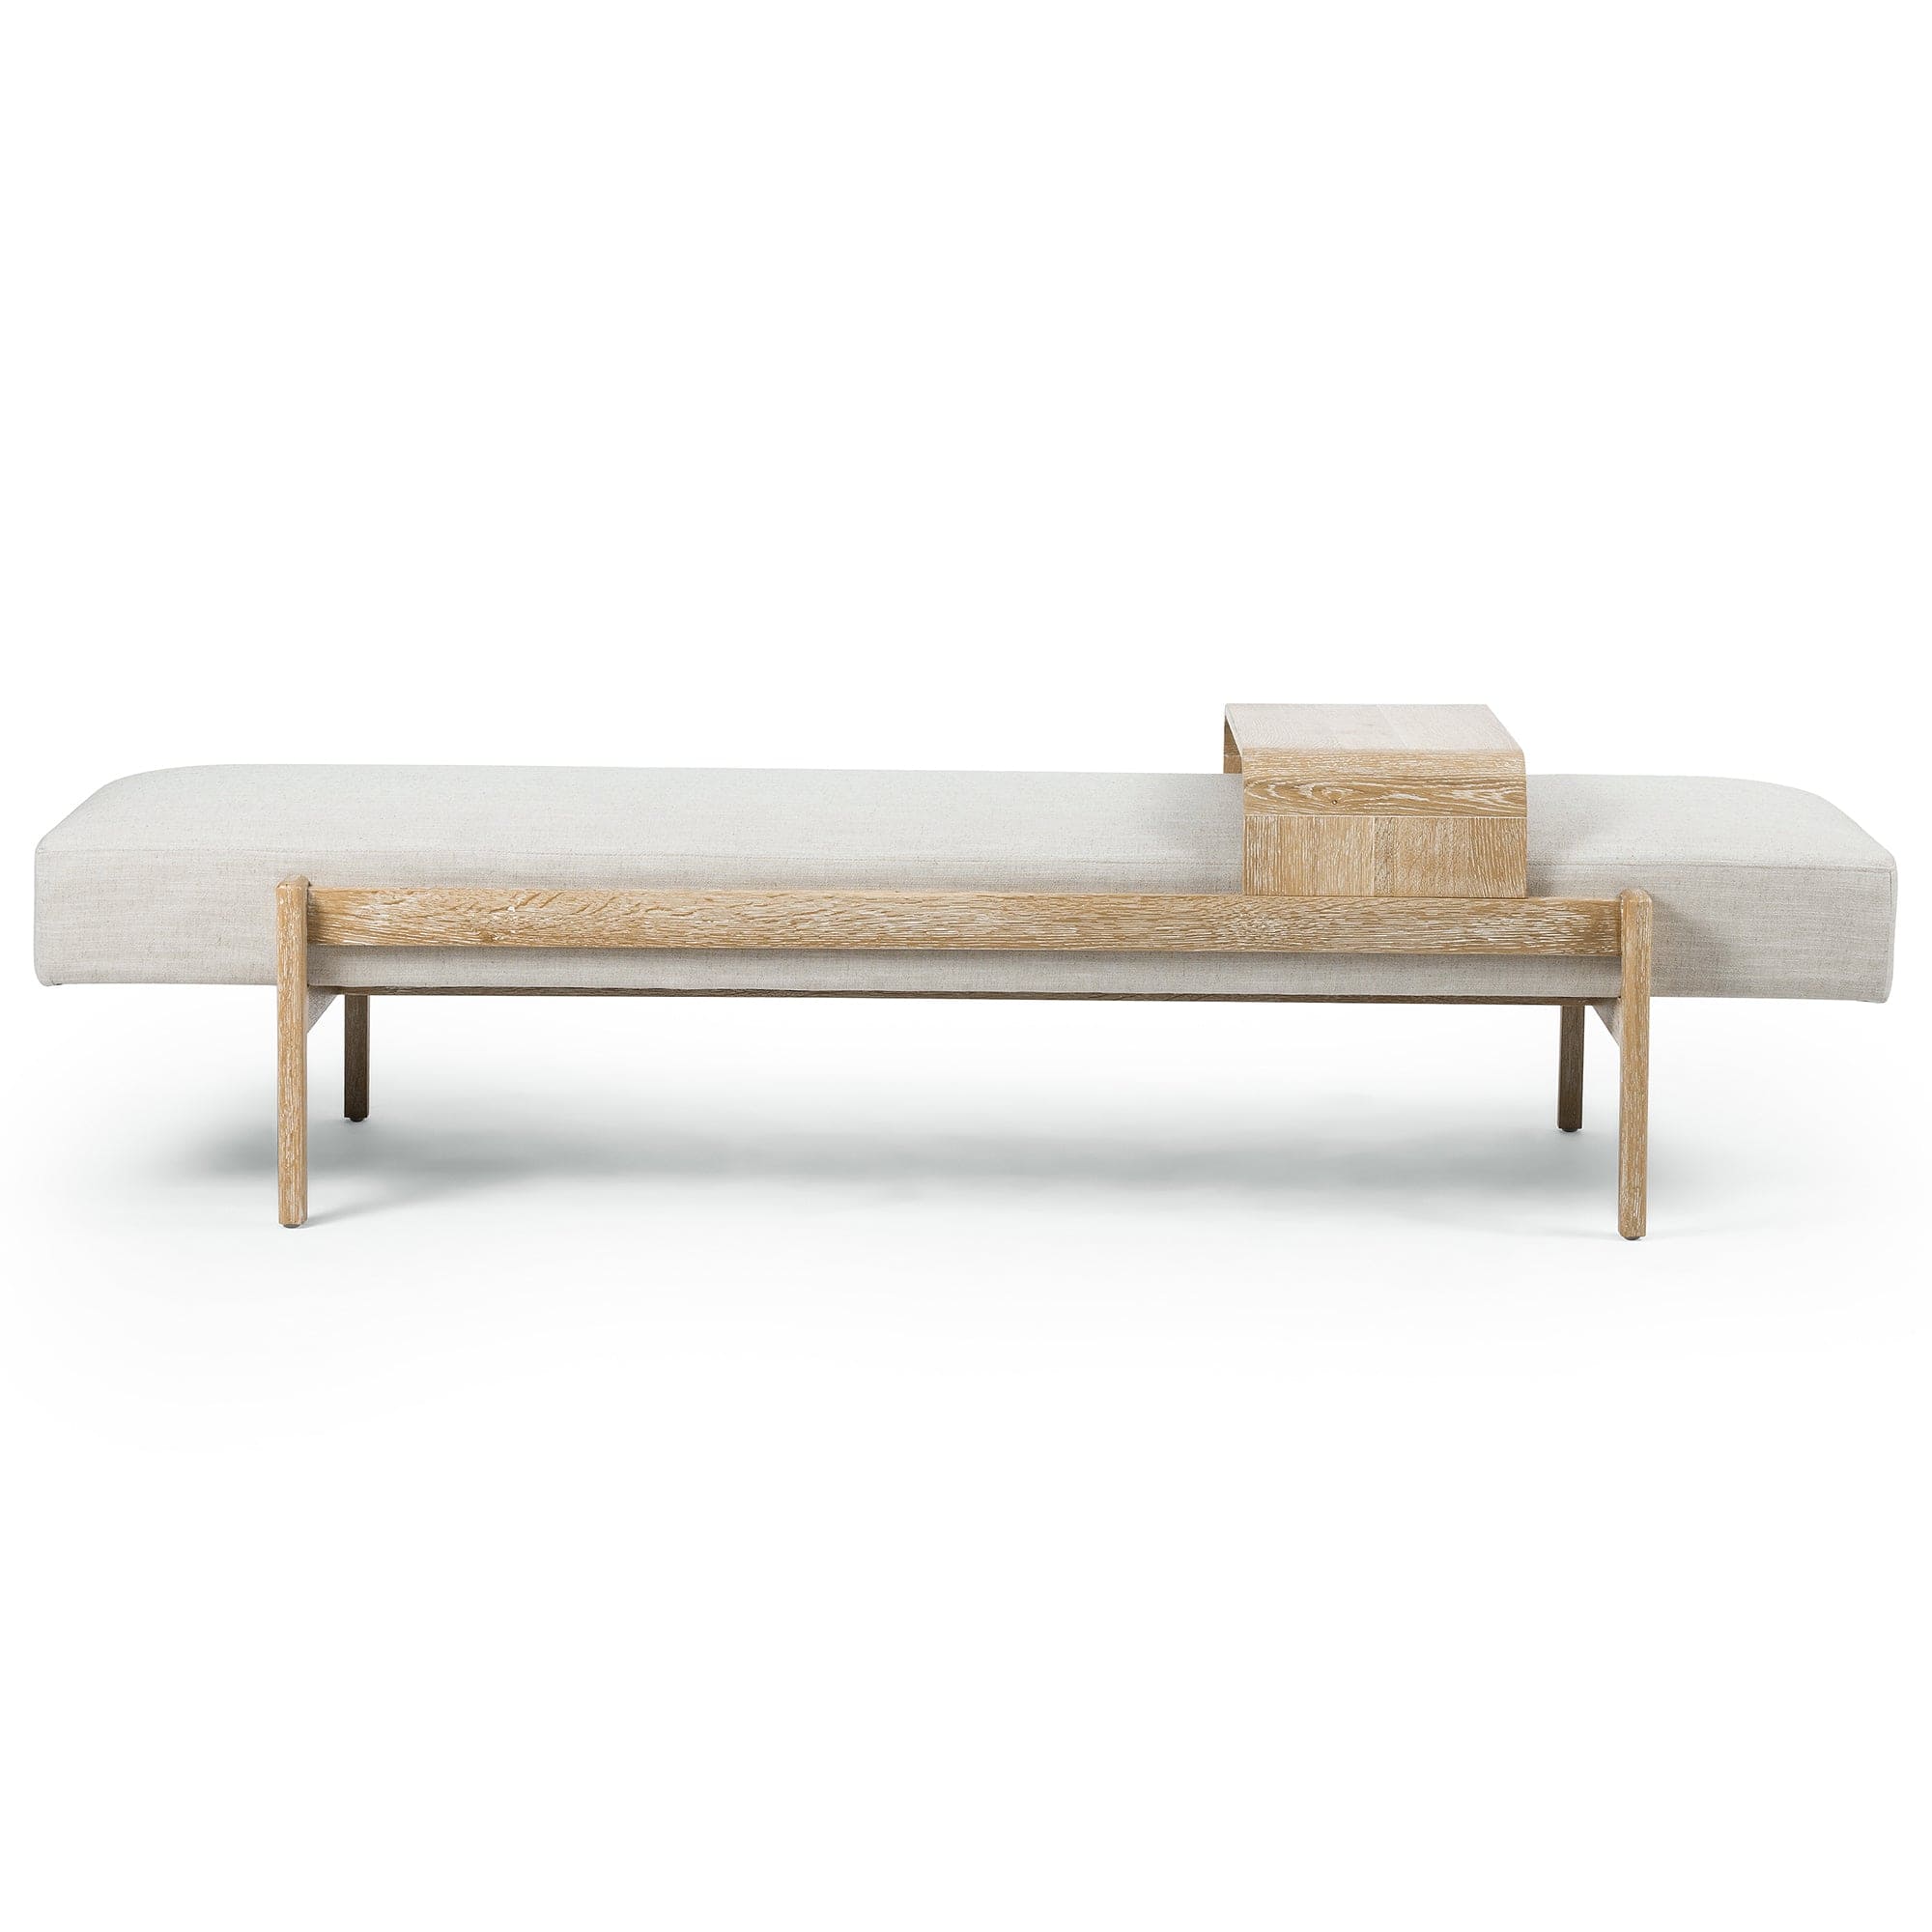 Blu – Meadow Fawkes Hands Bench Four